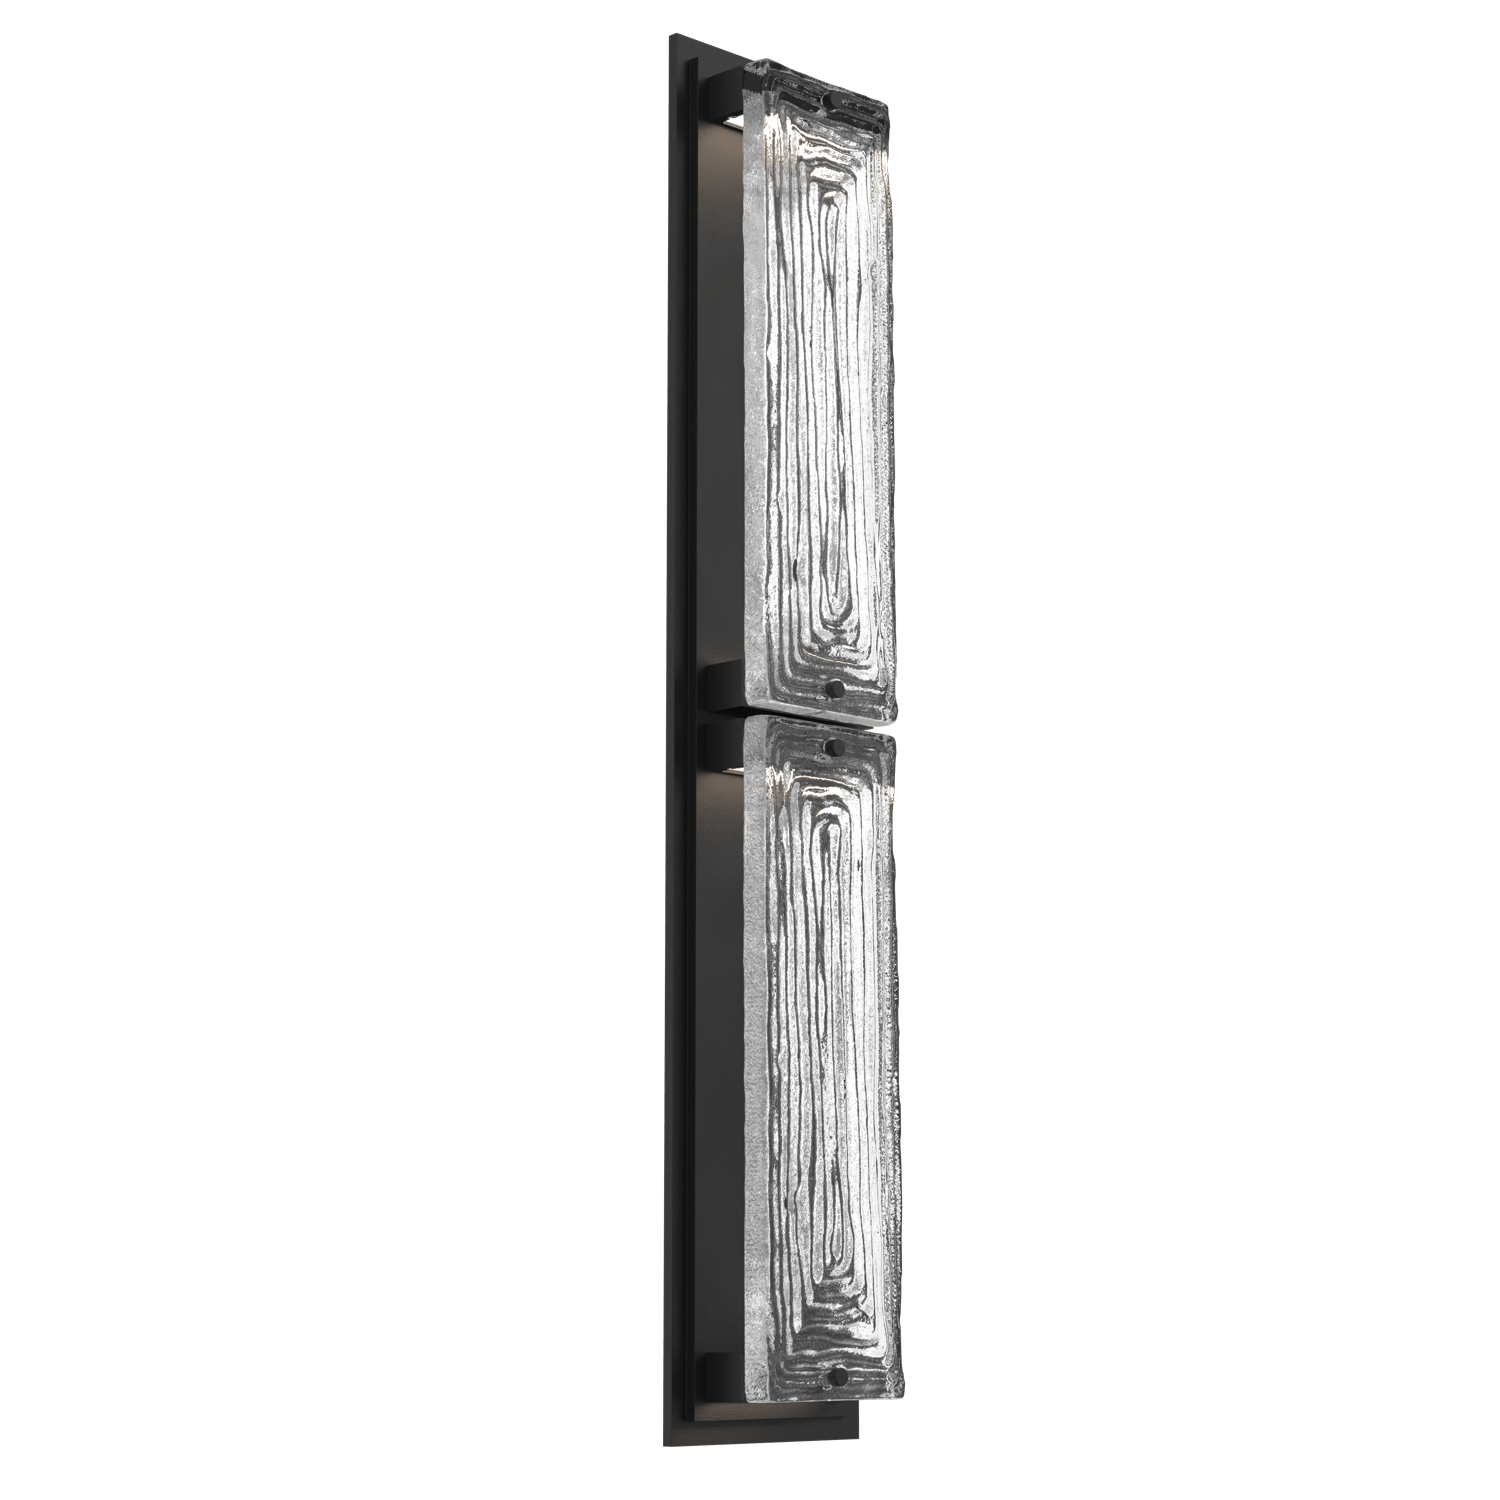 ODB0090-02-TB-TL-Hammerton-Studio-Tabulo-28-inch-outdoor-sconce-with-textured-black-finish-and-clear-linea-cast-glass-shade-and-LED-lamping